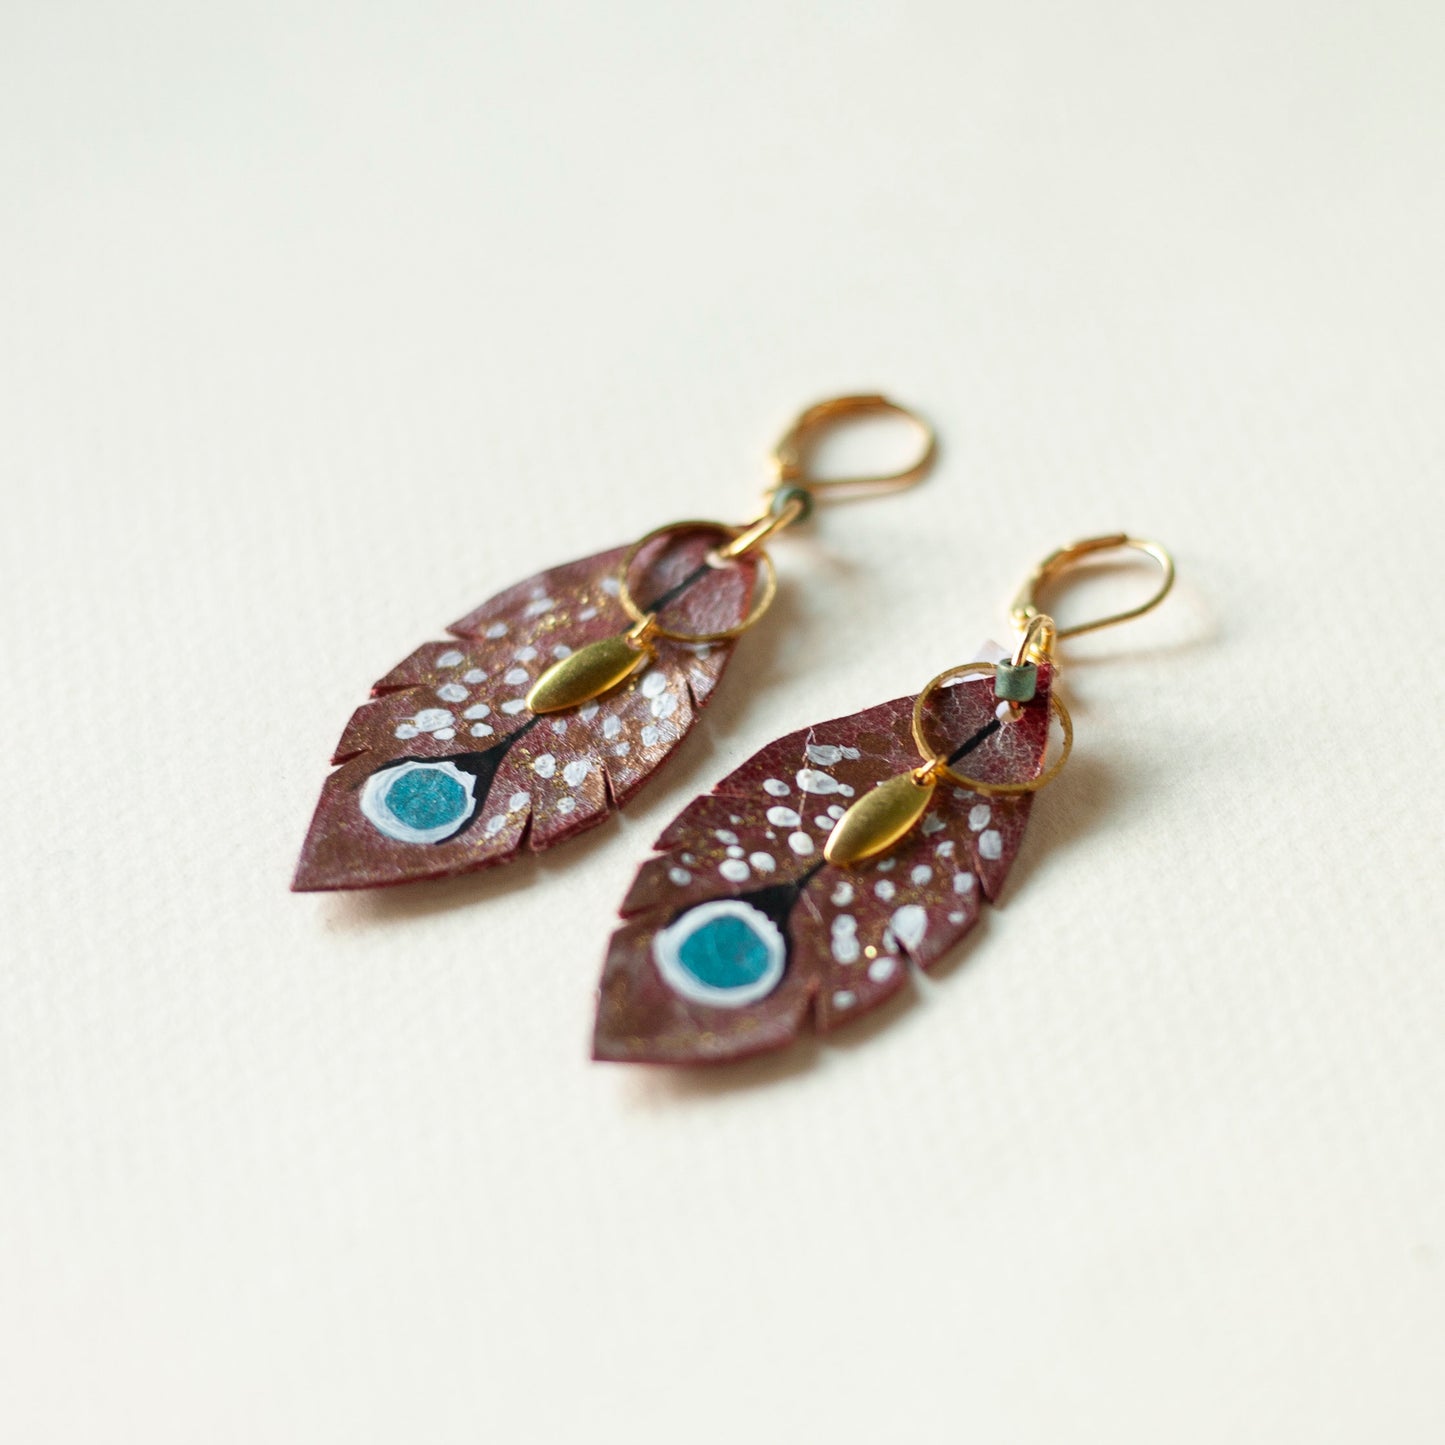 Plume de Paon earrings in brown white blue leather